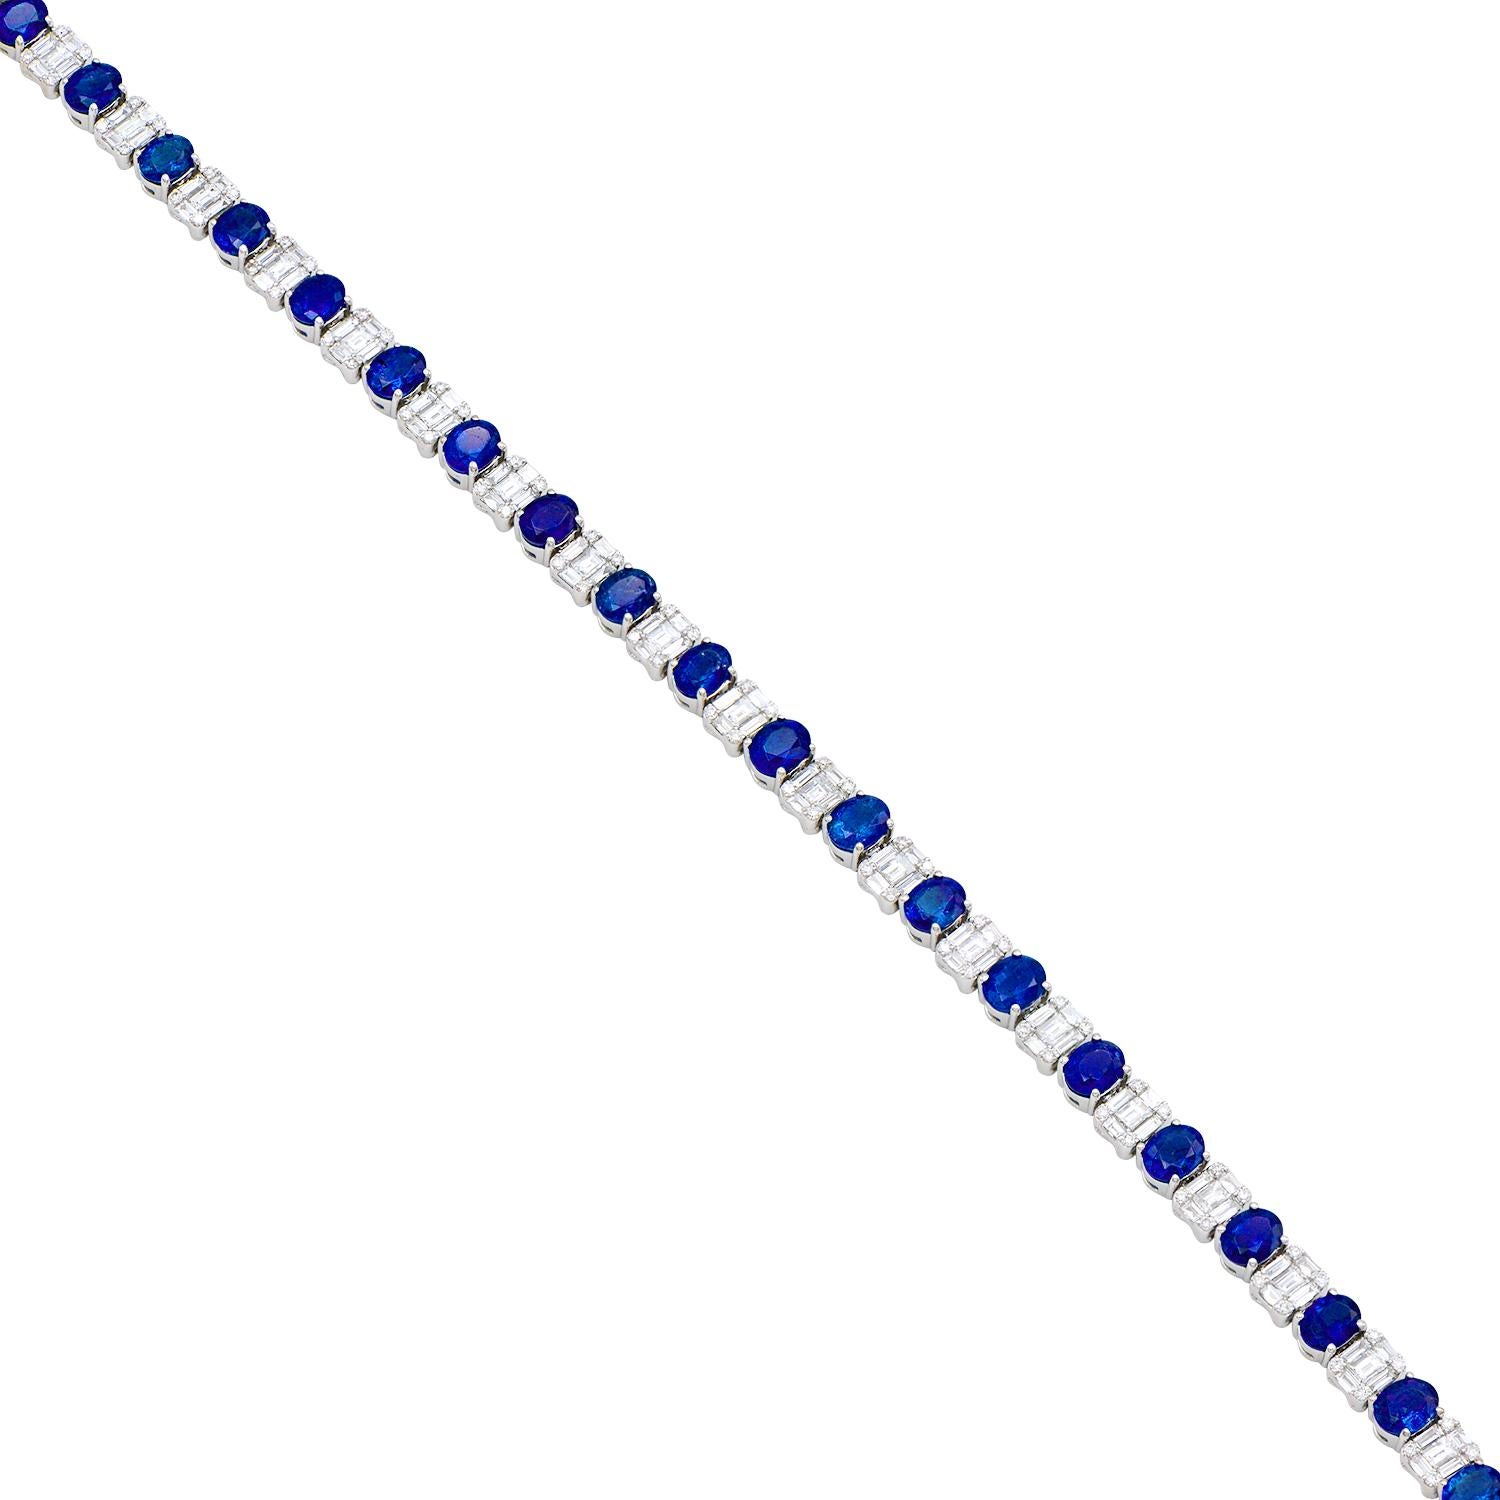 This truly gorgeous sapphire and diamond bracelet is made from 21 oval Ceylon blue sapphires totalling 8 carats that alternate with diamonds set to look like emerald-cut diamonds. They are made from 105 baguettes and 84 round diamonds which total